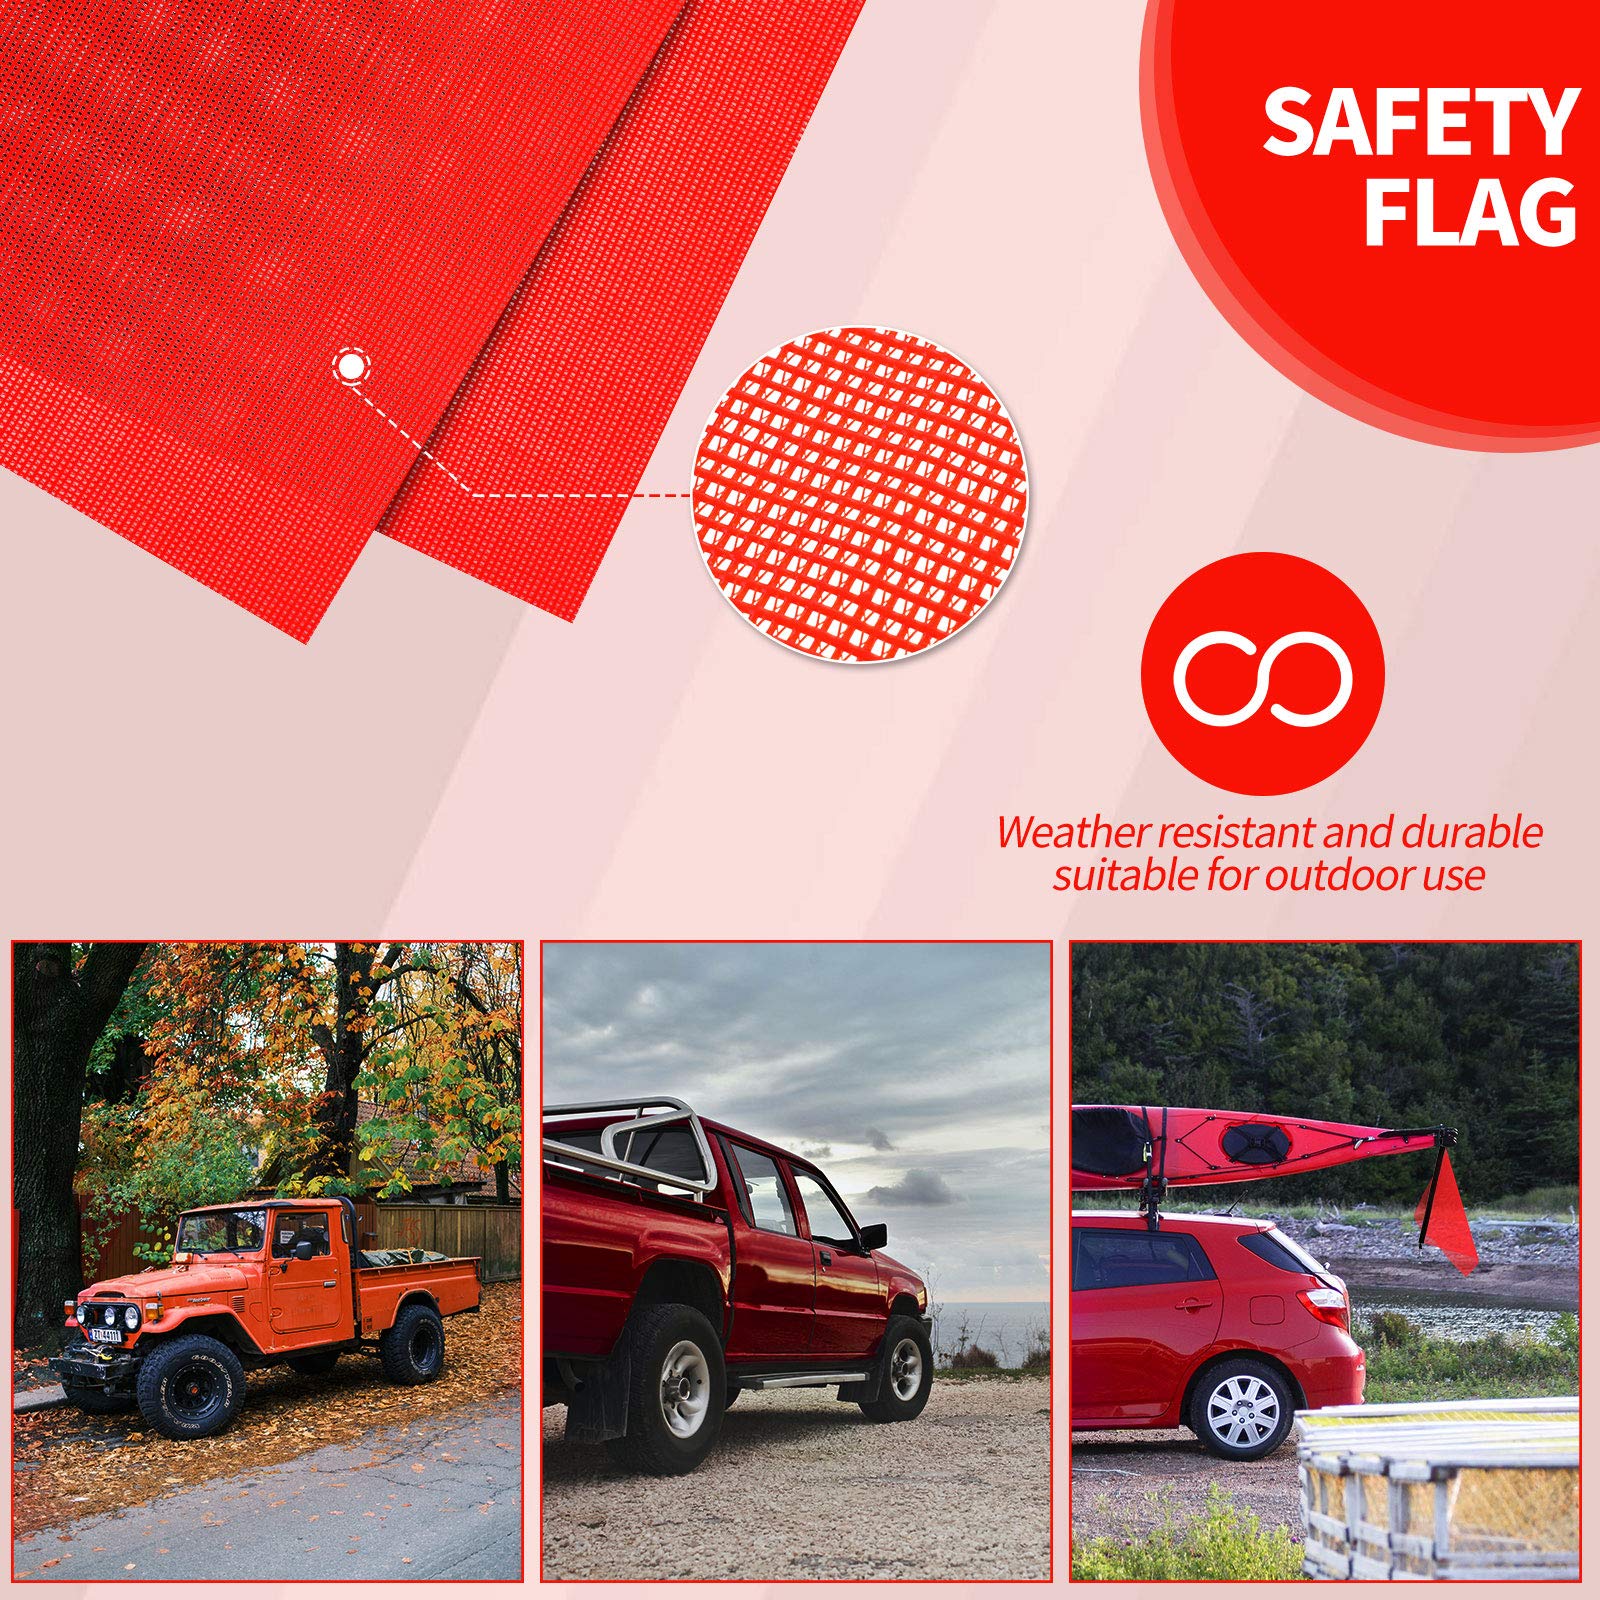 Boao 4 Pieces 18 x 18 Inch Hook Safety Warning Flag Mesh Safety Flag Warning Flag with Vinyl Welt and Bungee Cord for Truck and Pedestrian Crossings, Deep Red